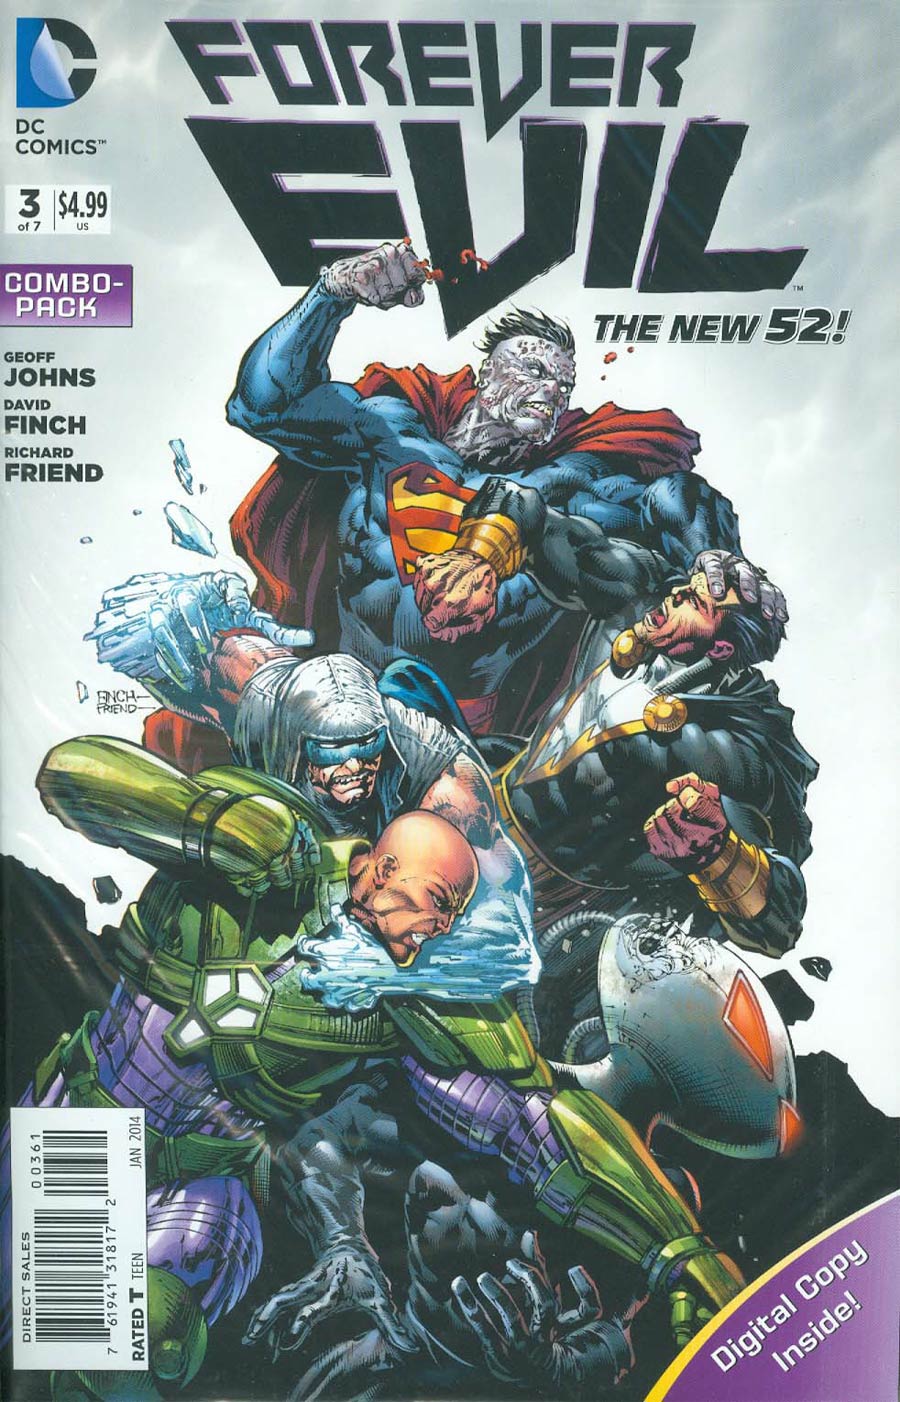 Forever Evil #3 Cover C Combo Pack Without Polybag